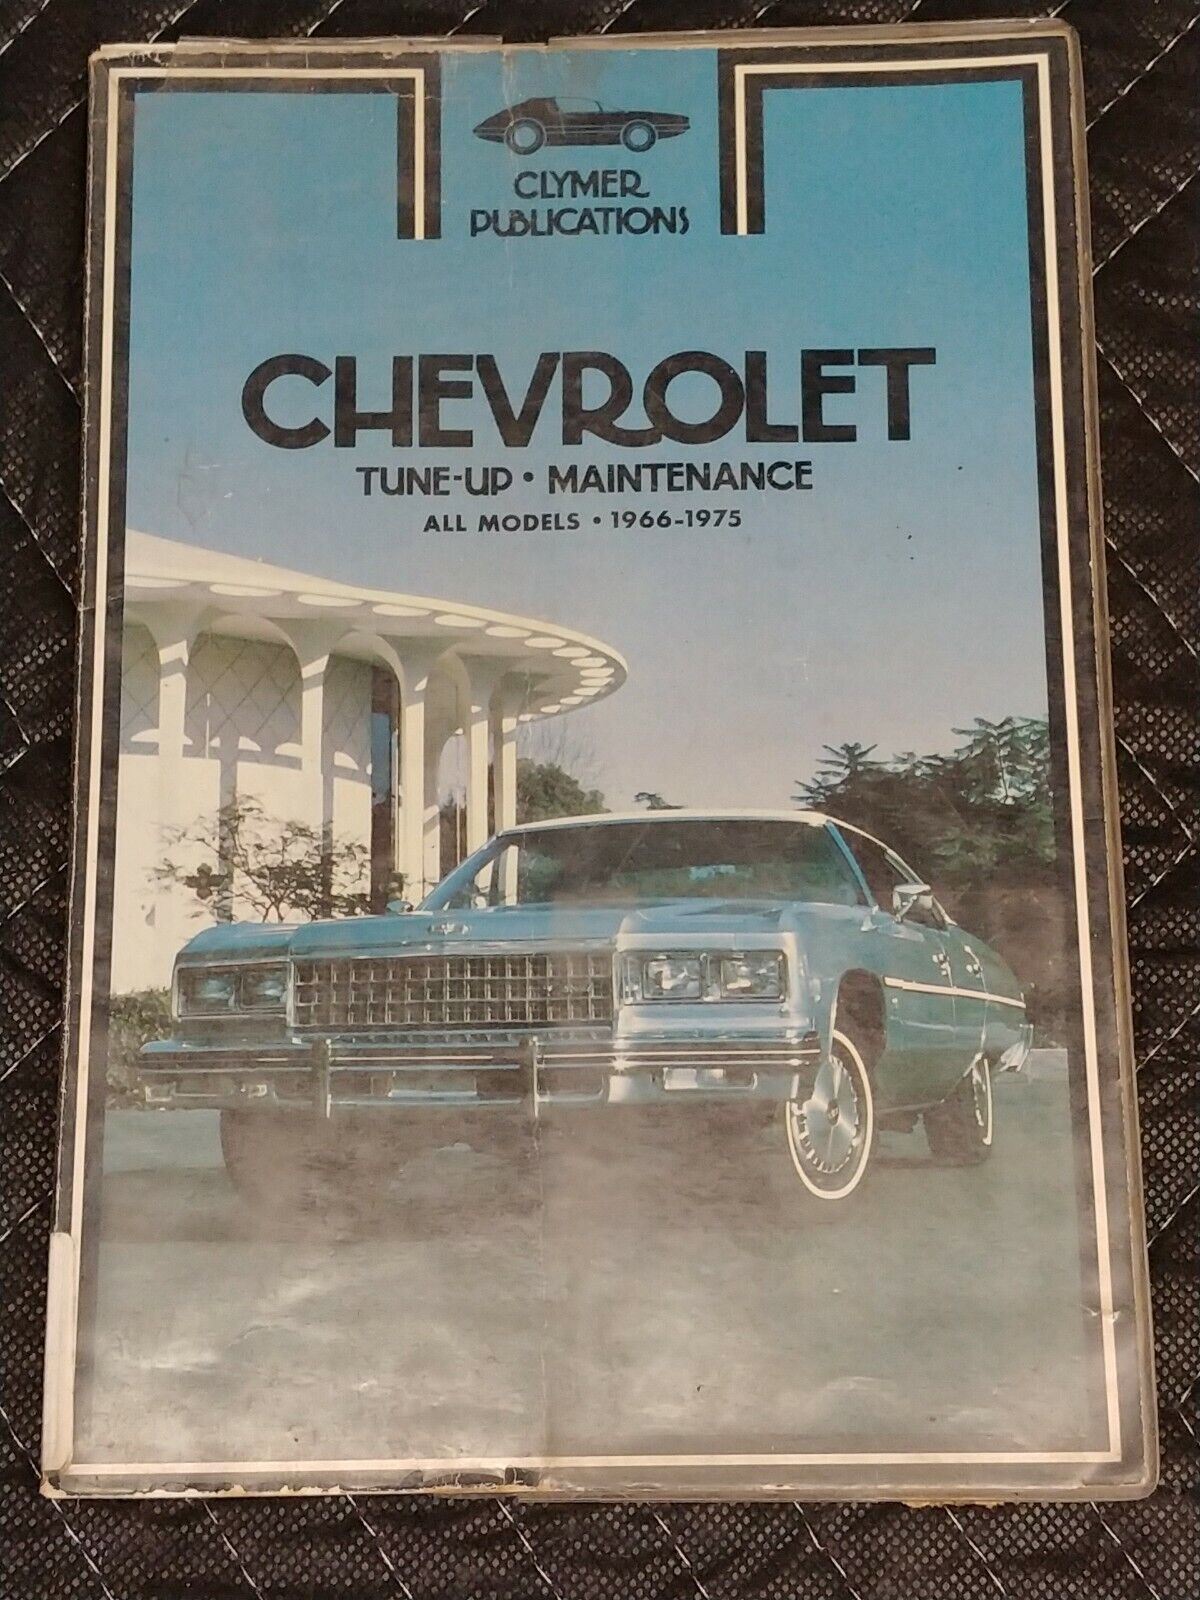 Chevrolet tune-up, maintenance: All models, 1966-1975, , Combs Jim, 1976